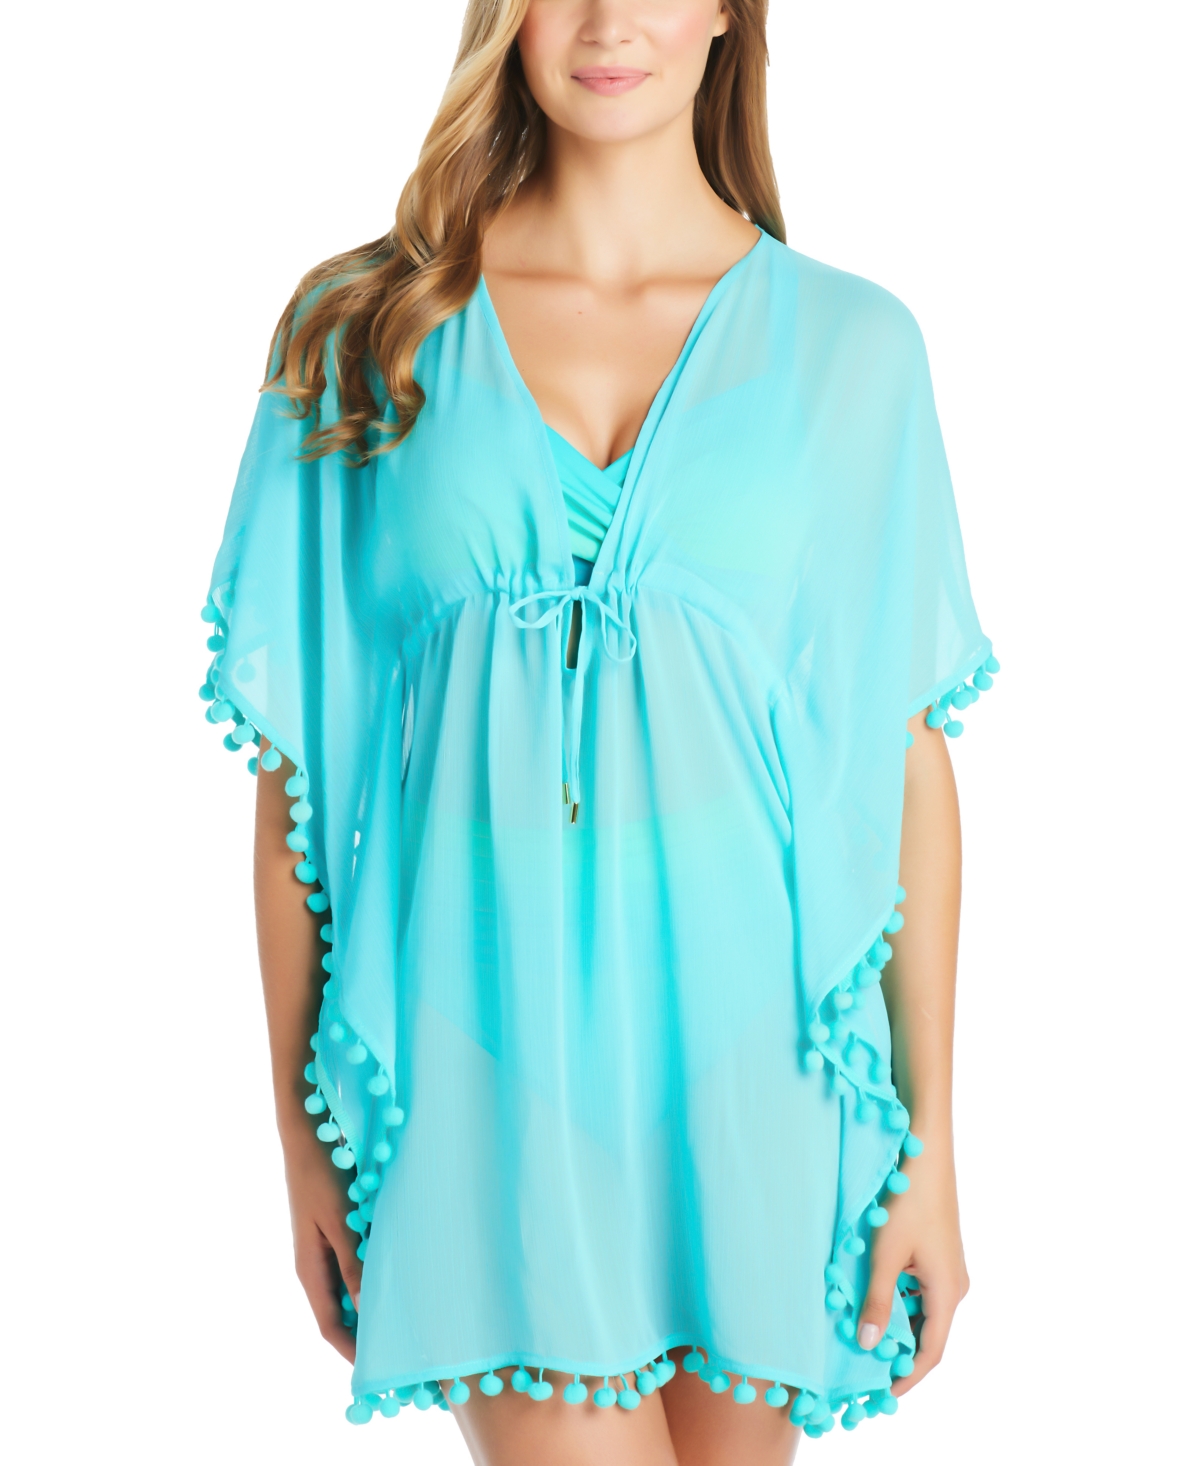 BLEU BY ROD BEATTIE CAFTAN COVER-UP